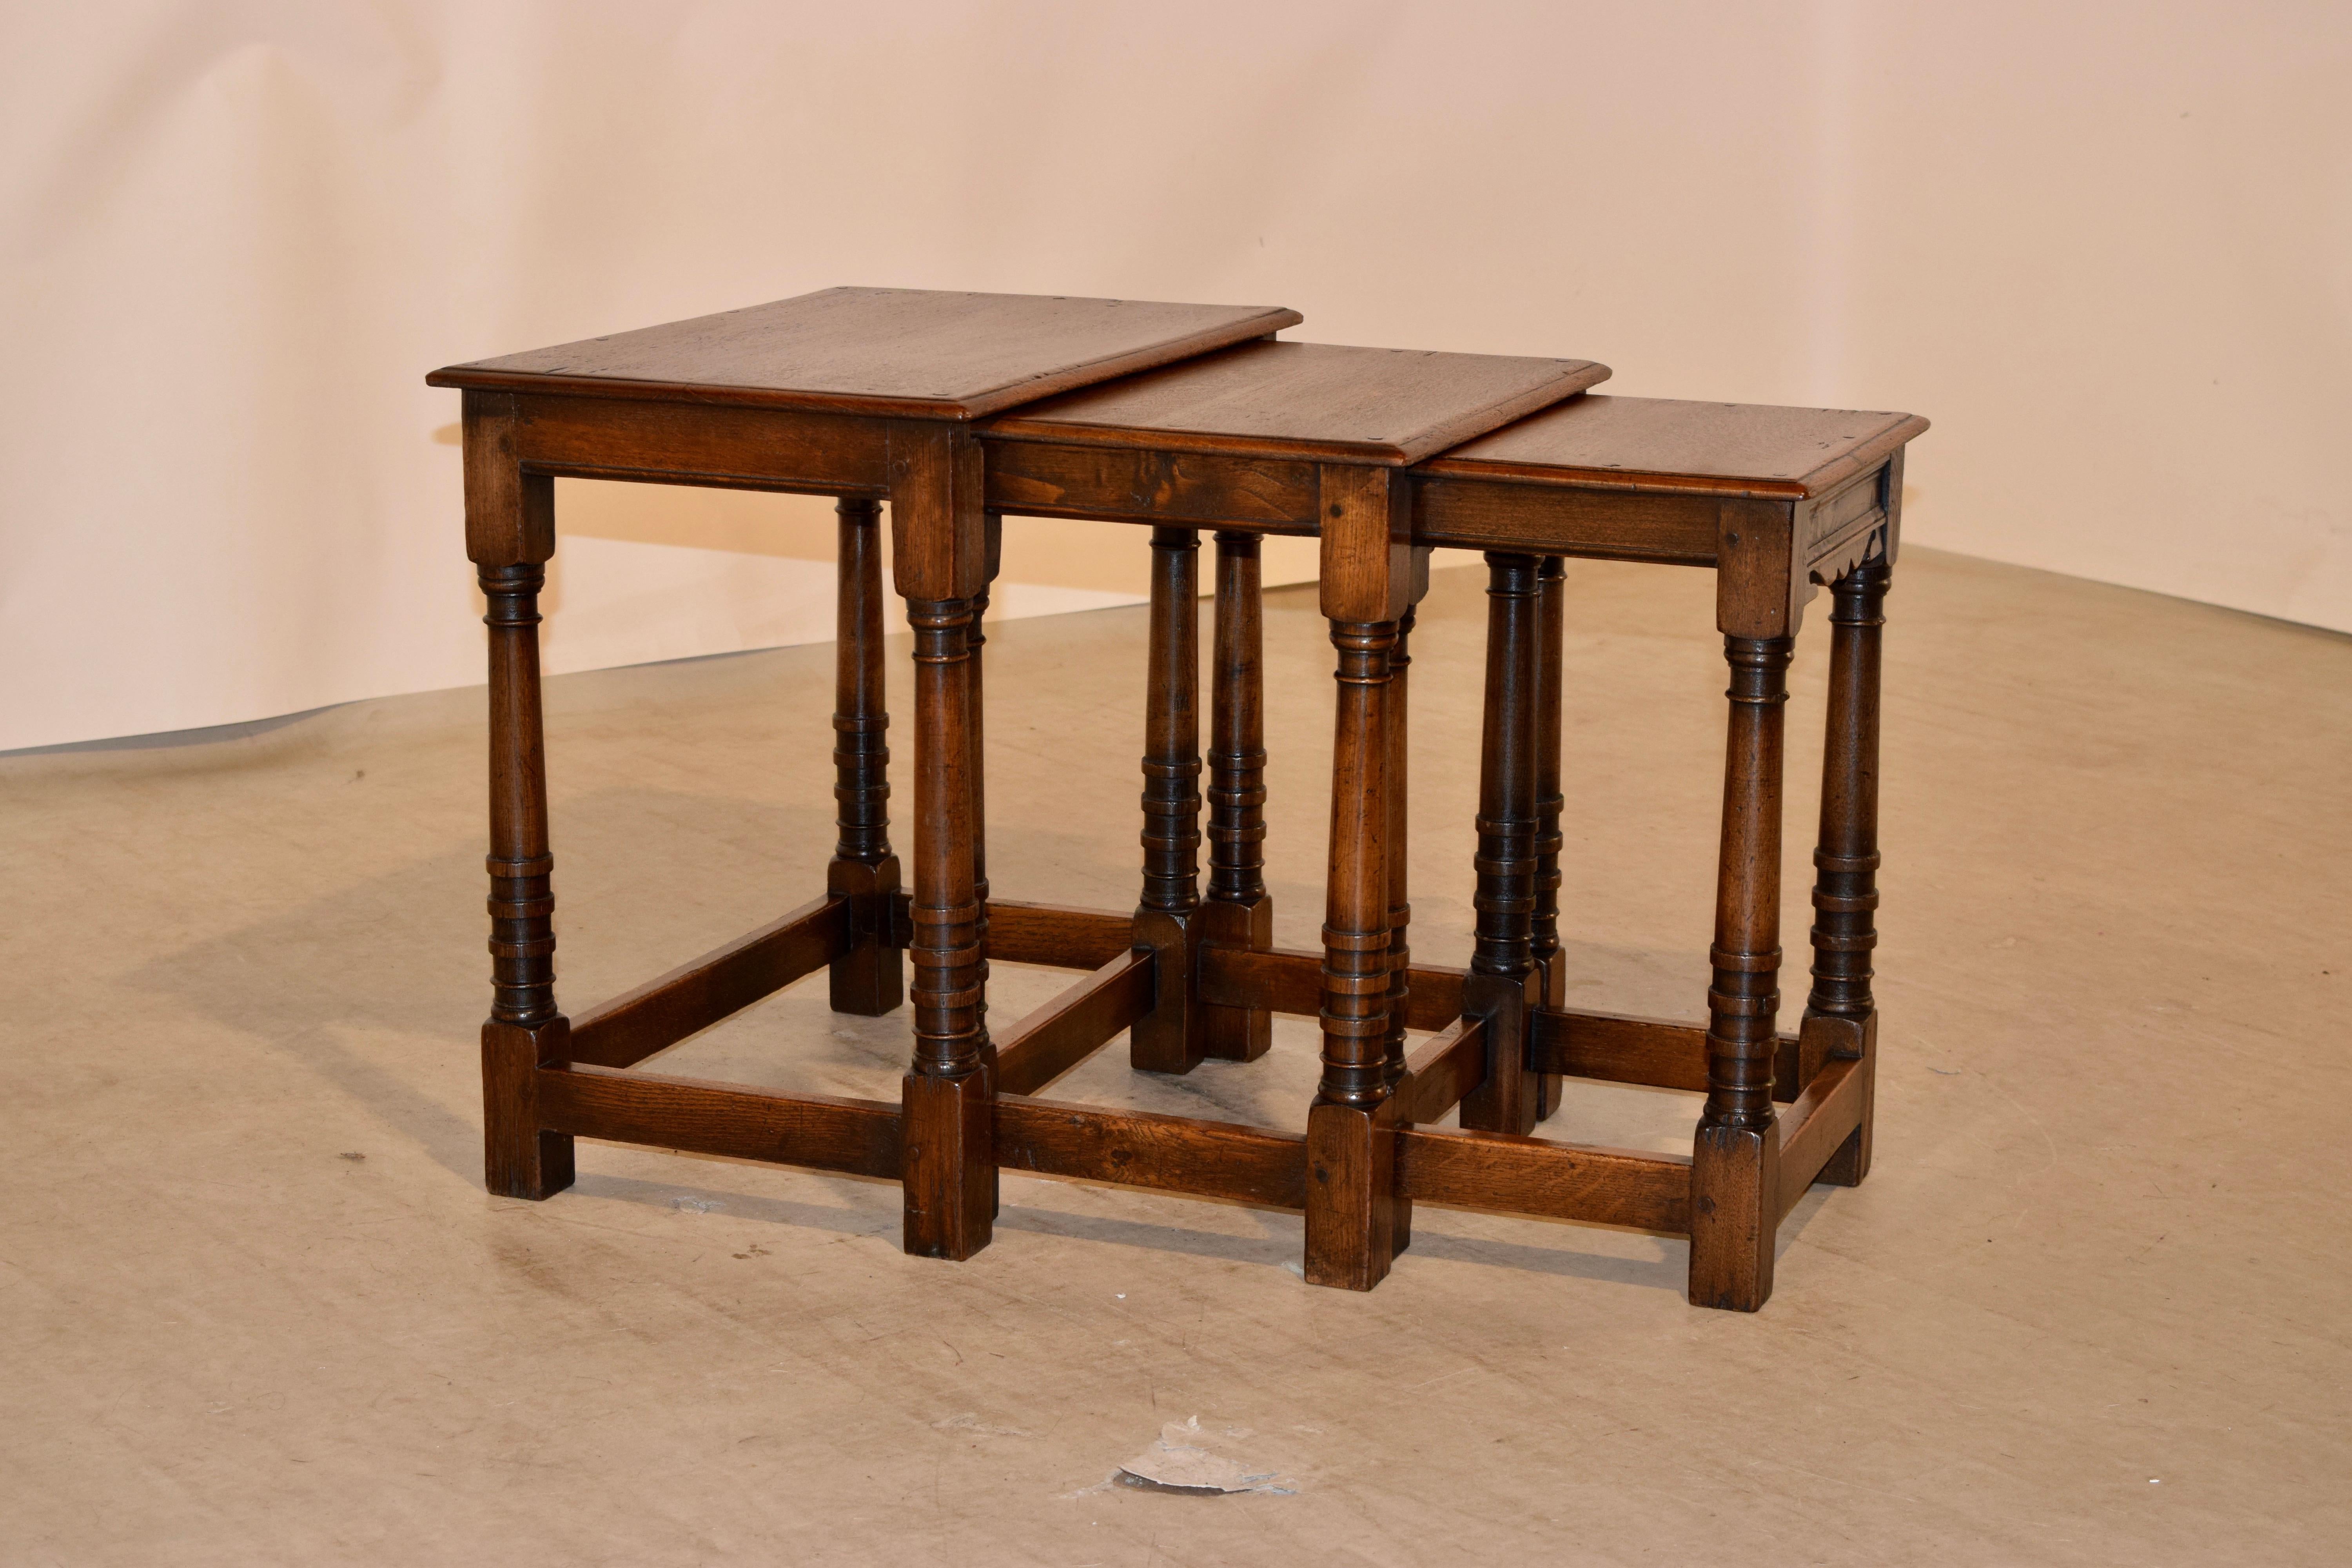 Turned Nest of Three Tables, circa 1900